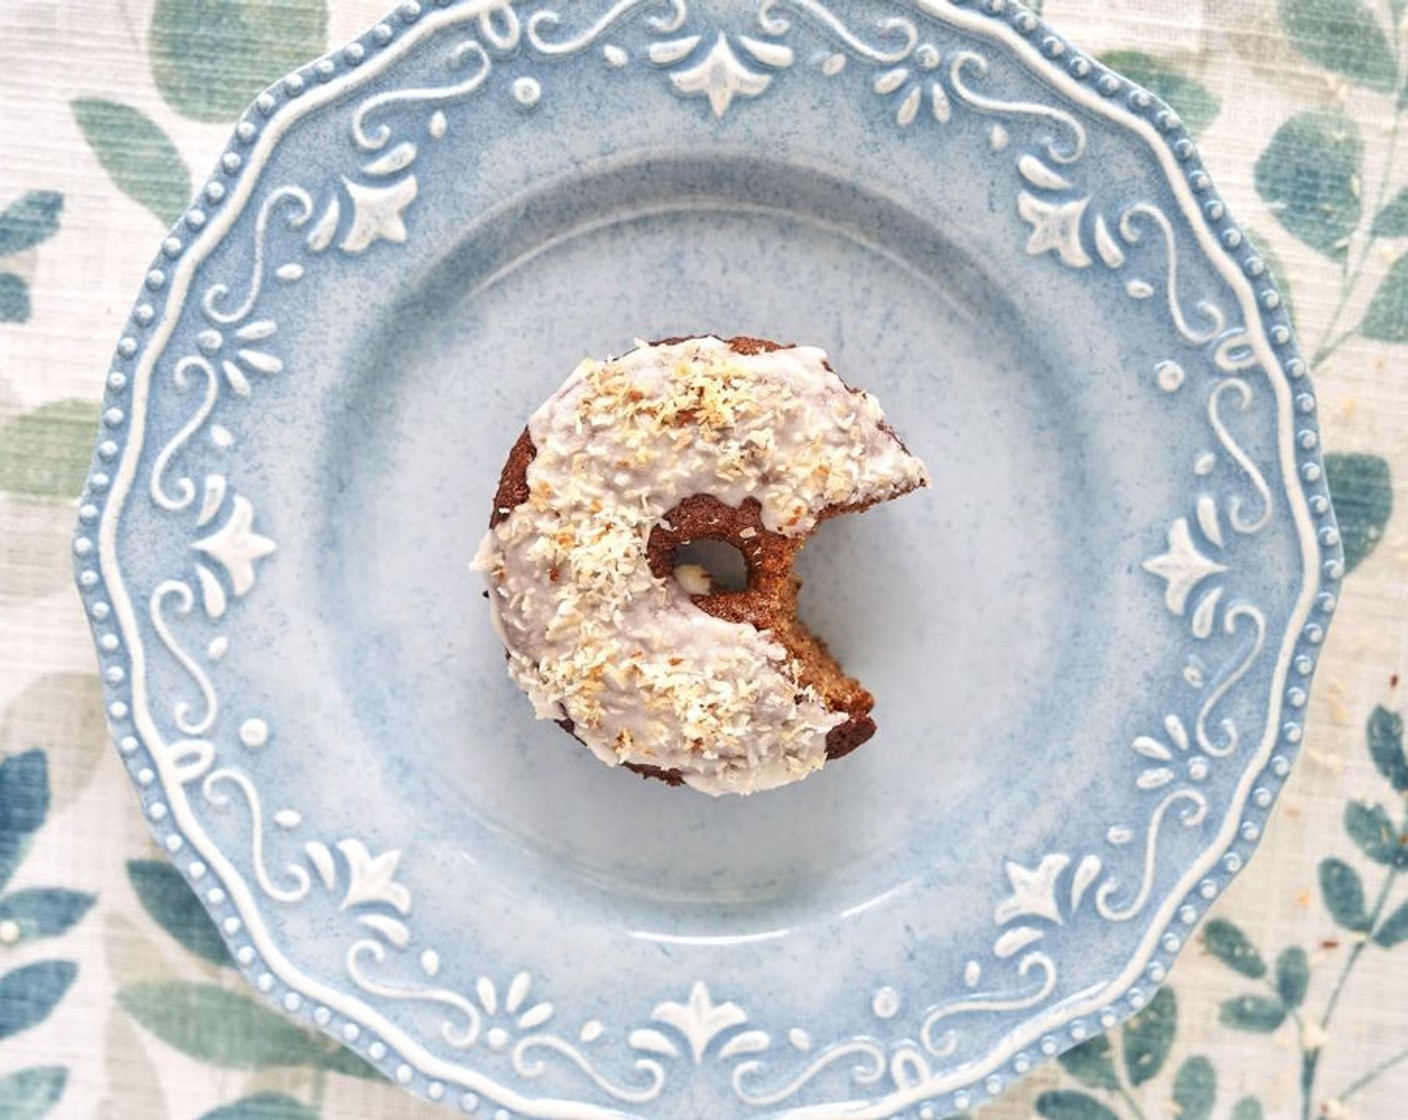 step 8 Spoon the melted coconut glaze over top of each donut. Sprinkle toasted coconut shreds on top.